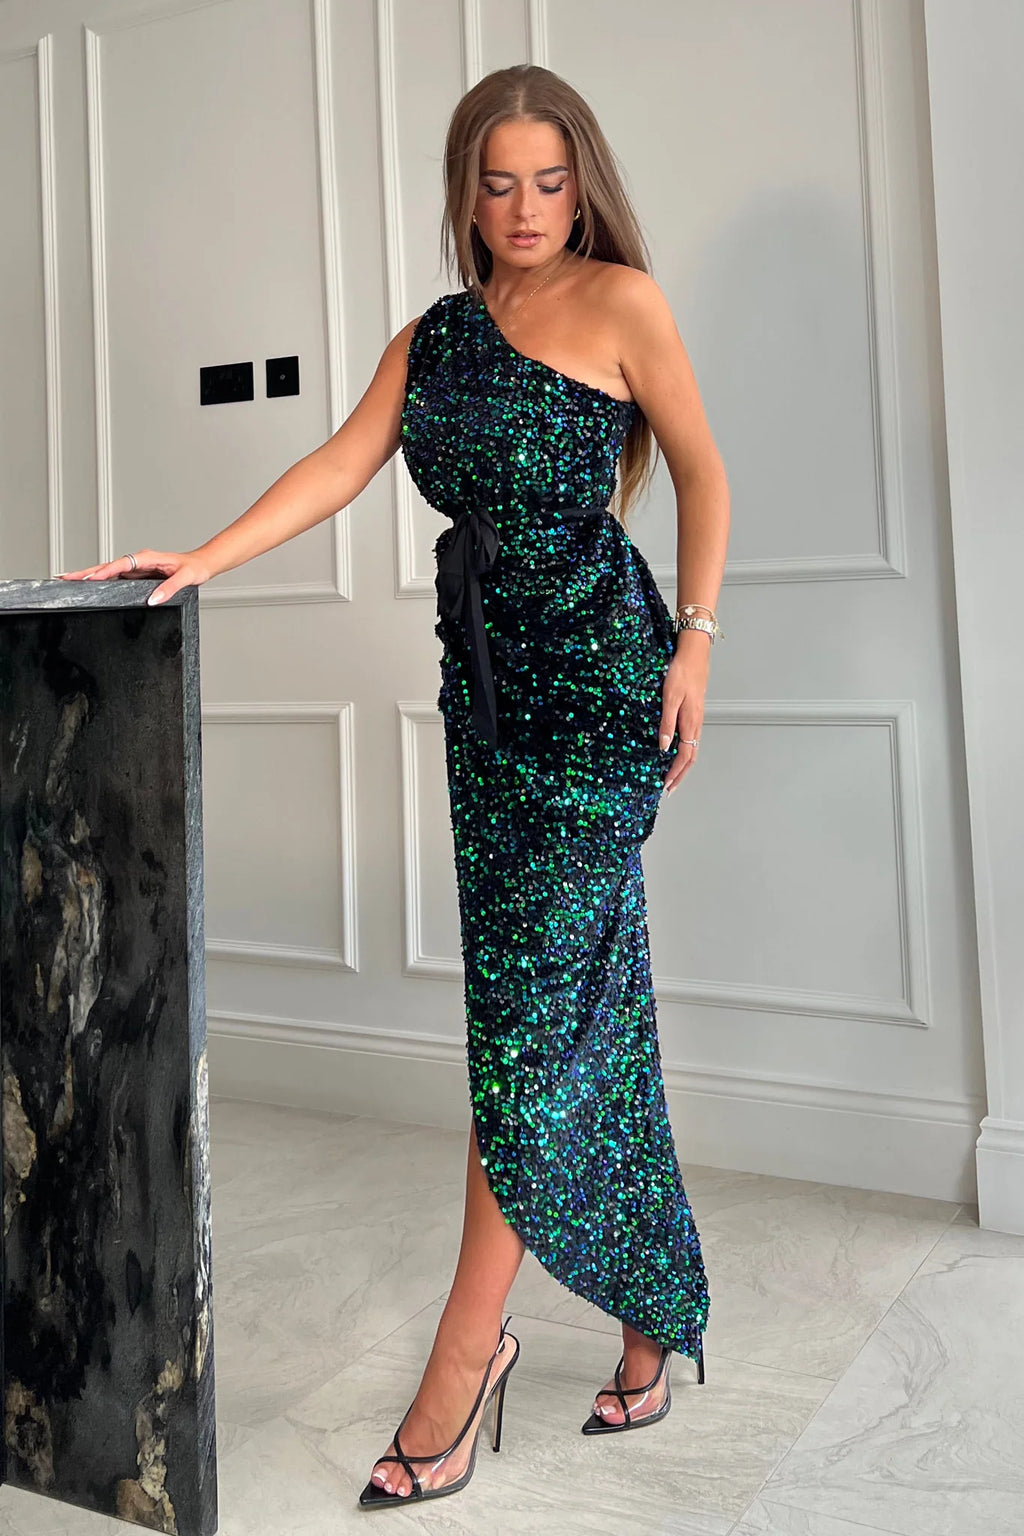 Featuring a wrap over skirt with ruched sides, one shoulder detail and a belt to cinch in the waist, all in this gorgeous velvet sequin. Style with some elegant heels and accessories for this chic look.